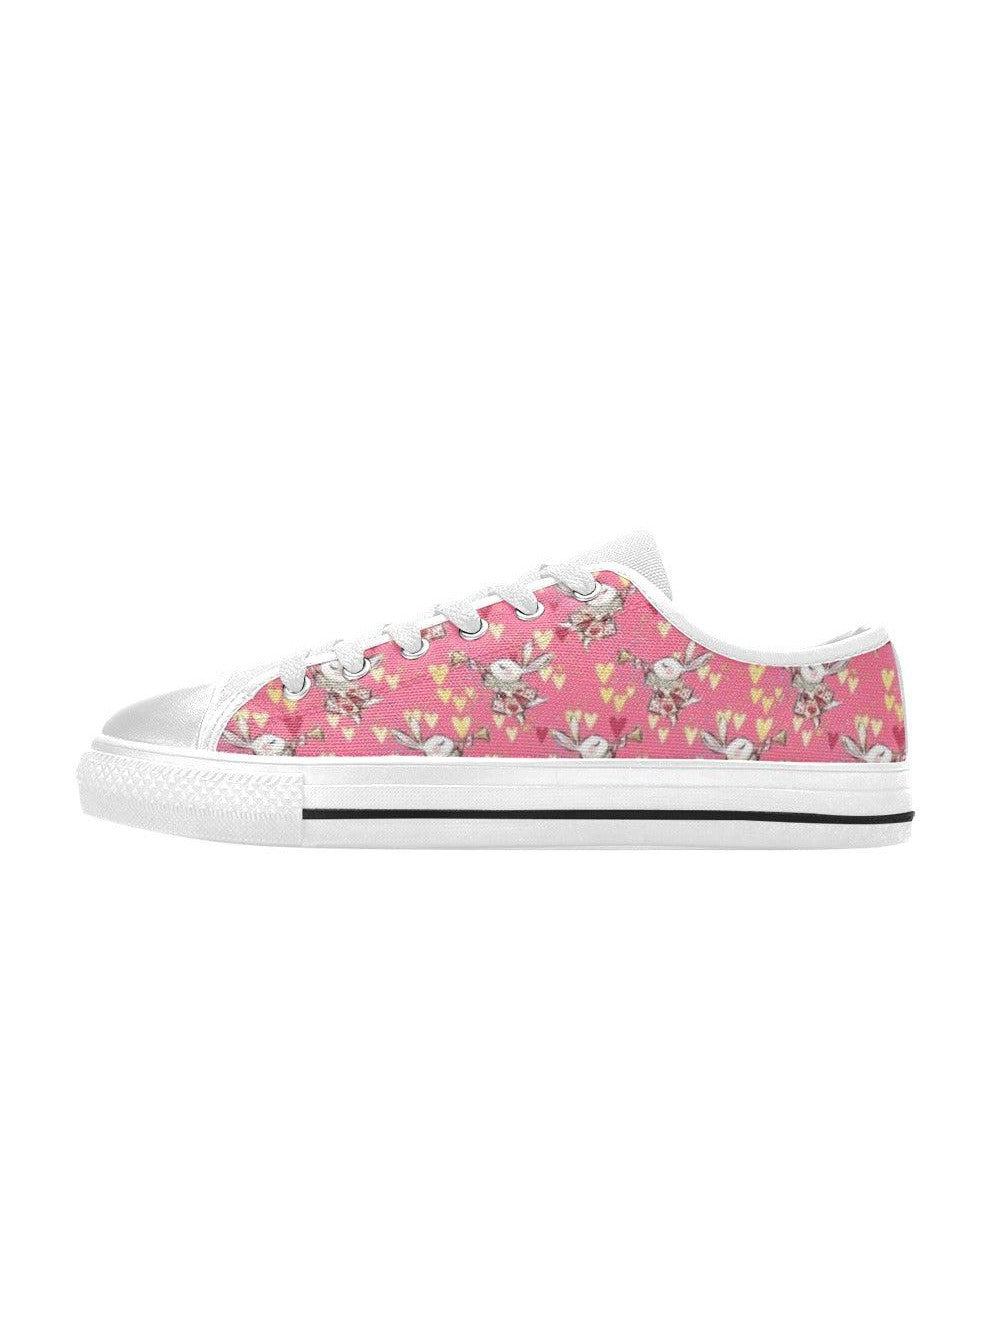 Down the Rabbit Hole Retro Style Sneakers